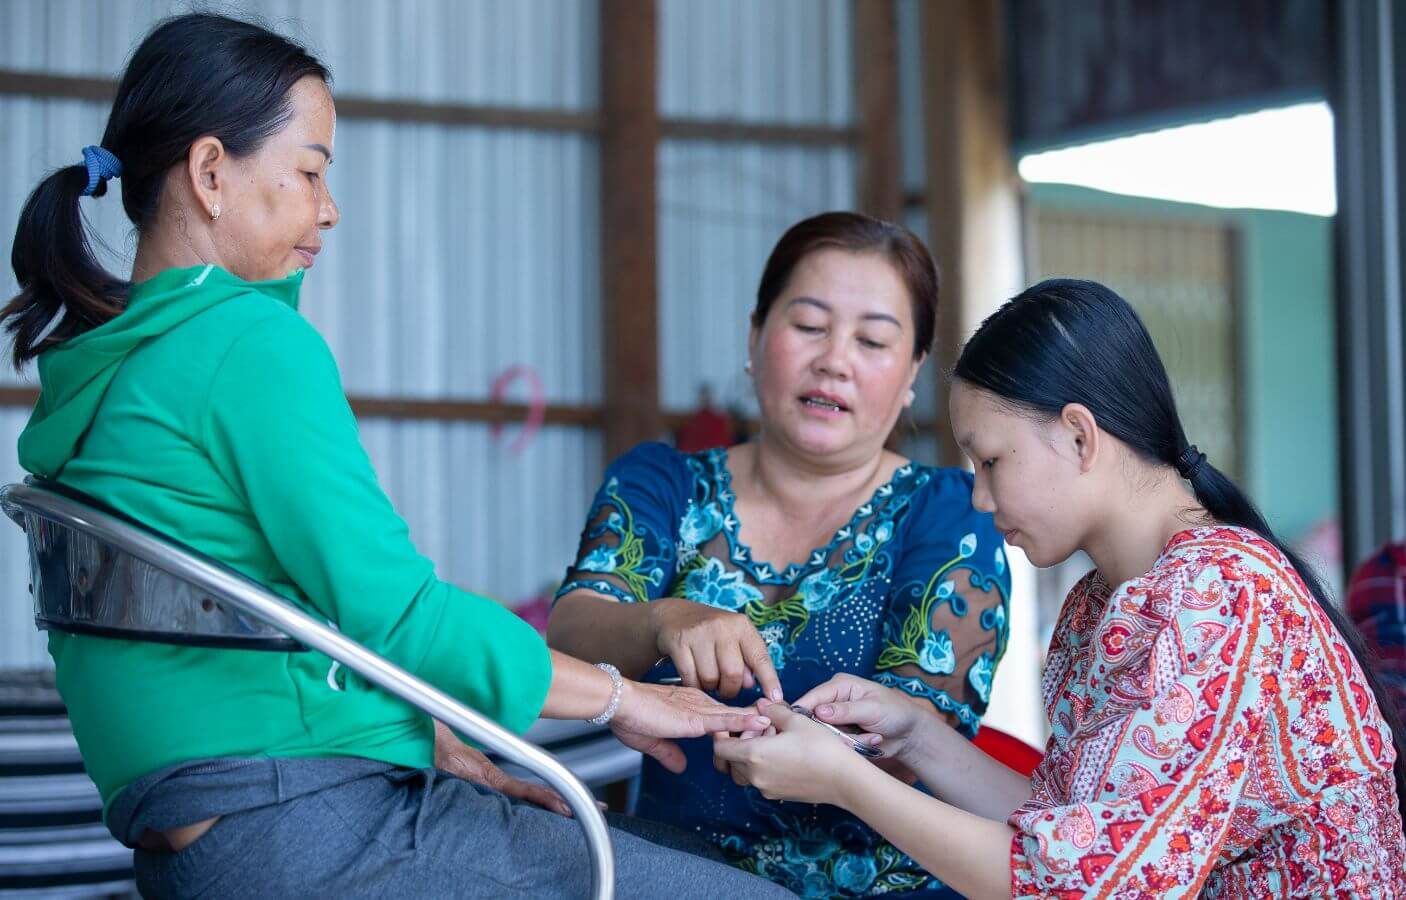 A salon owner (middle) guides Ngan on how to care for nails during her vocational training.